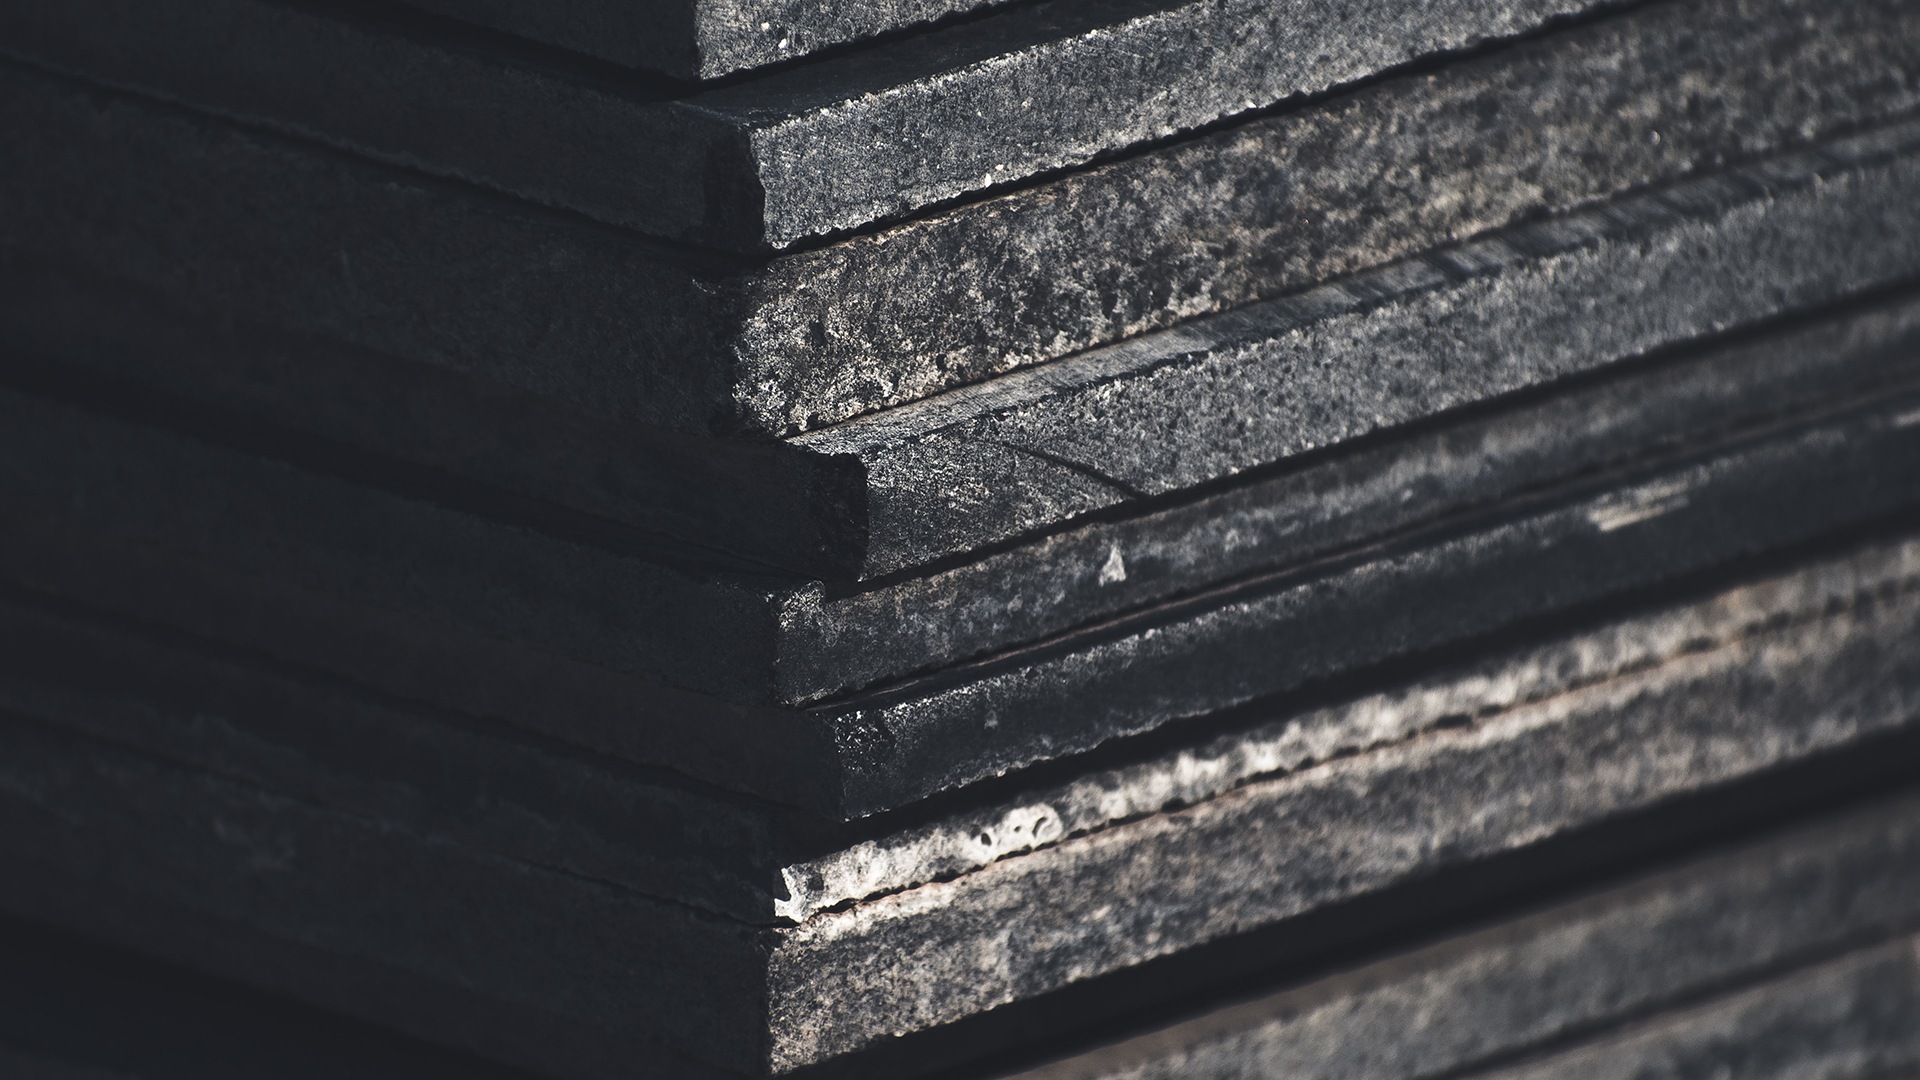 Landscaping Toronto - Close-up of a stack of weathered black slate stone tiles showing textures and edges.